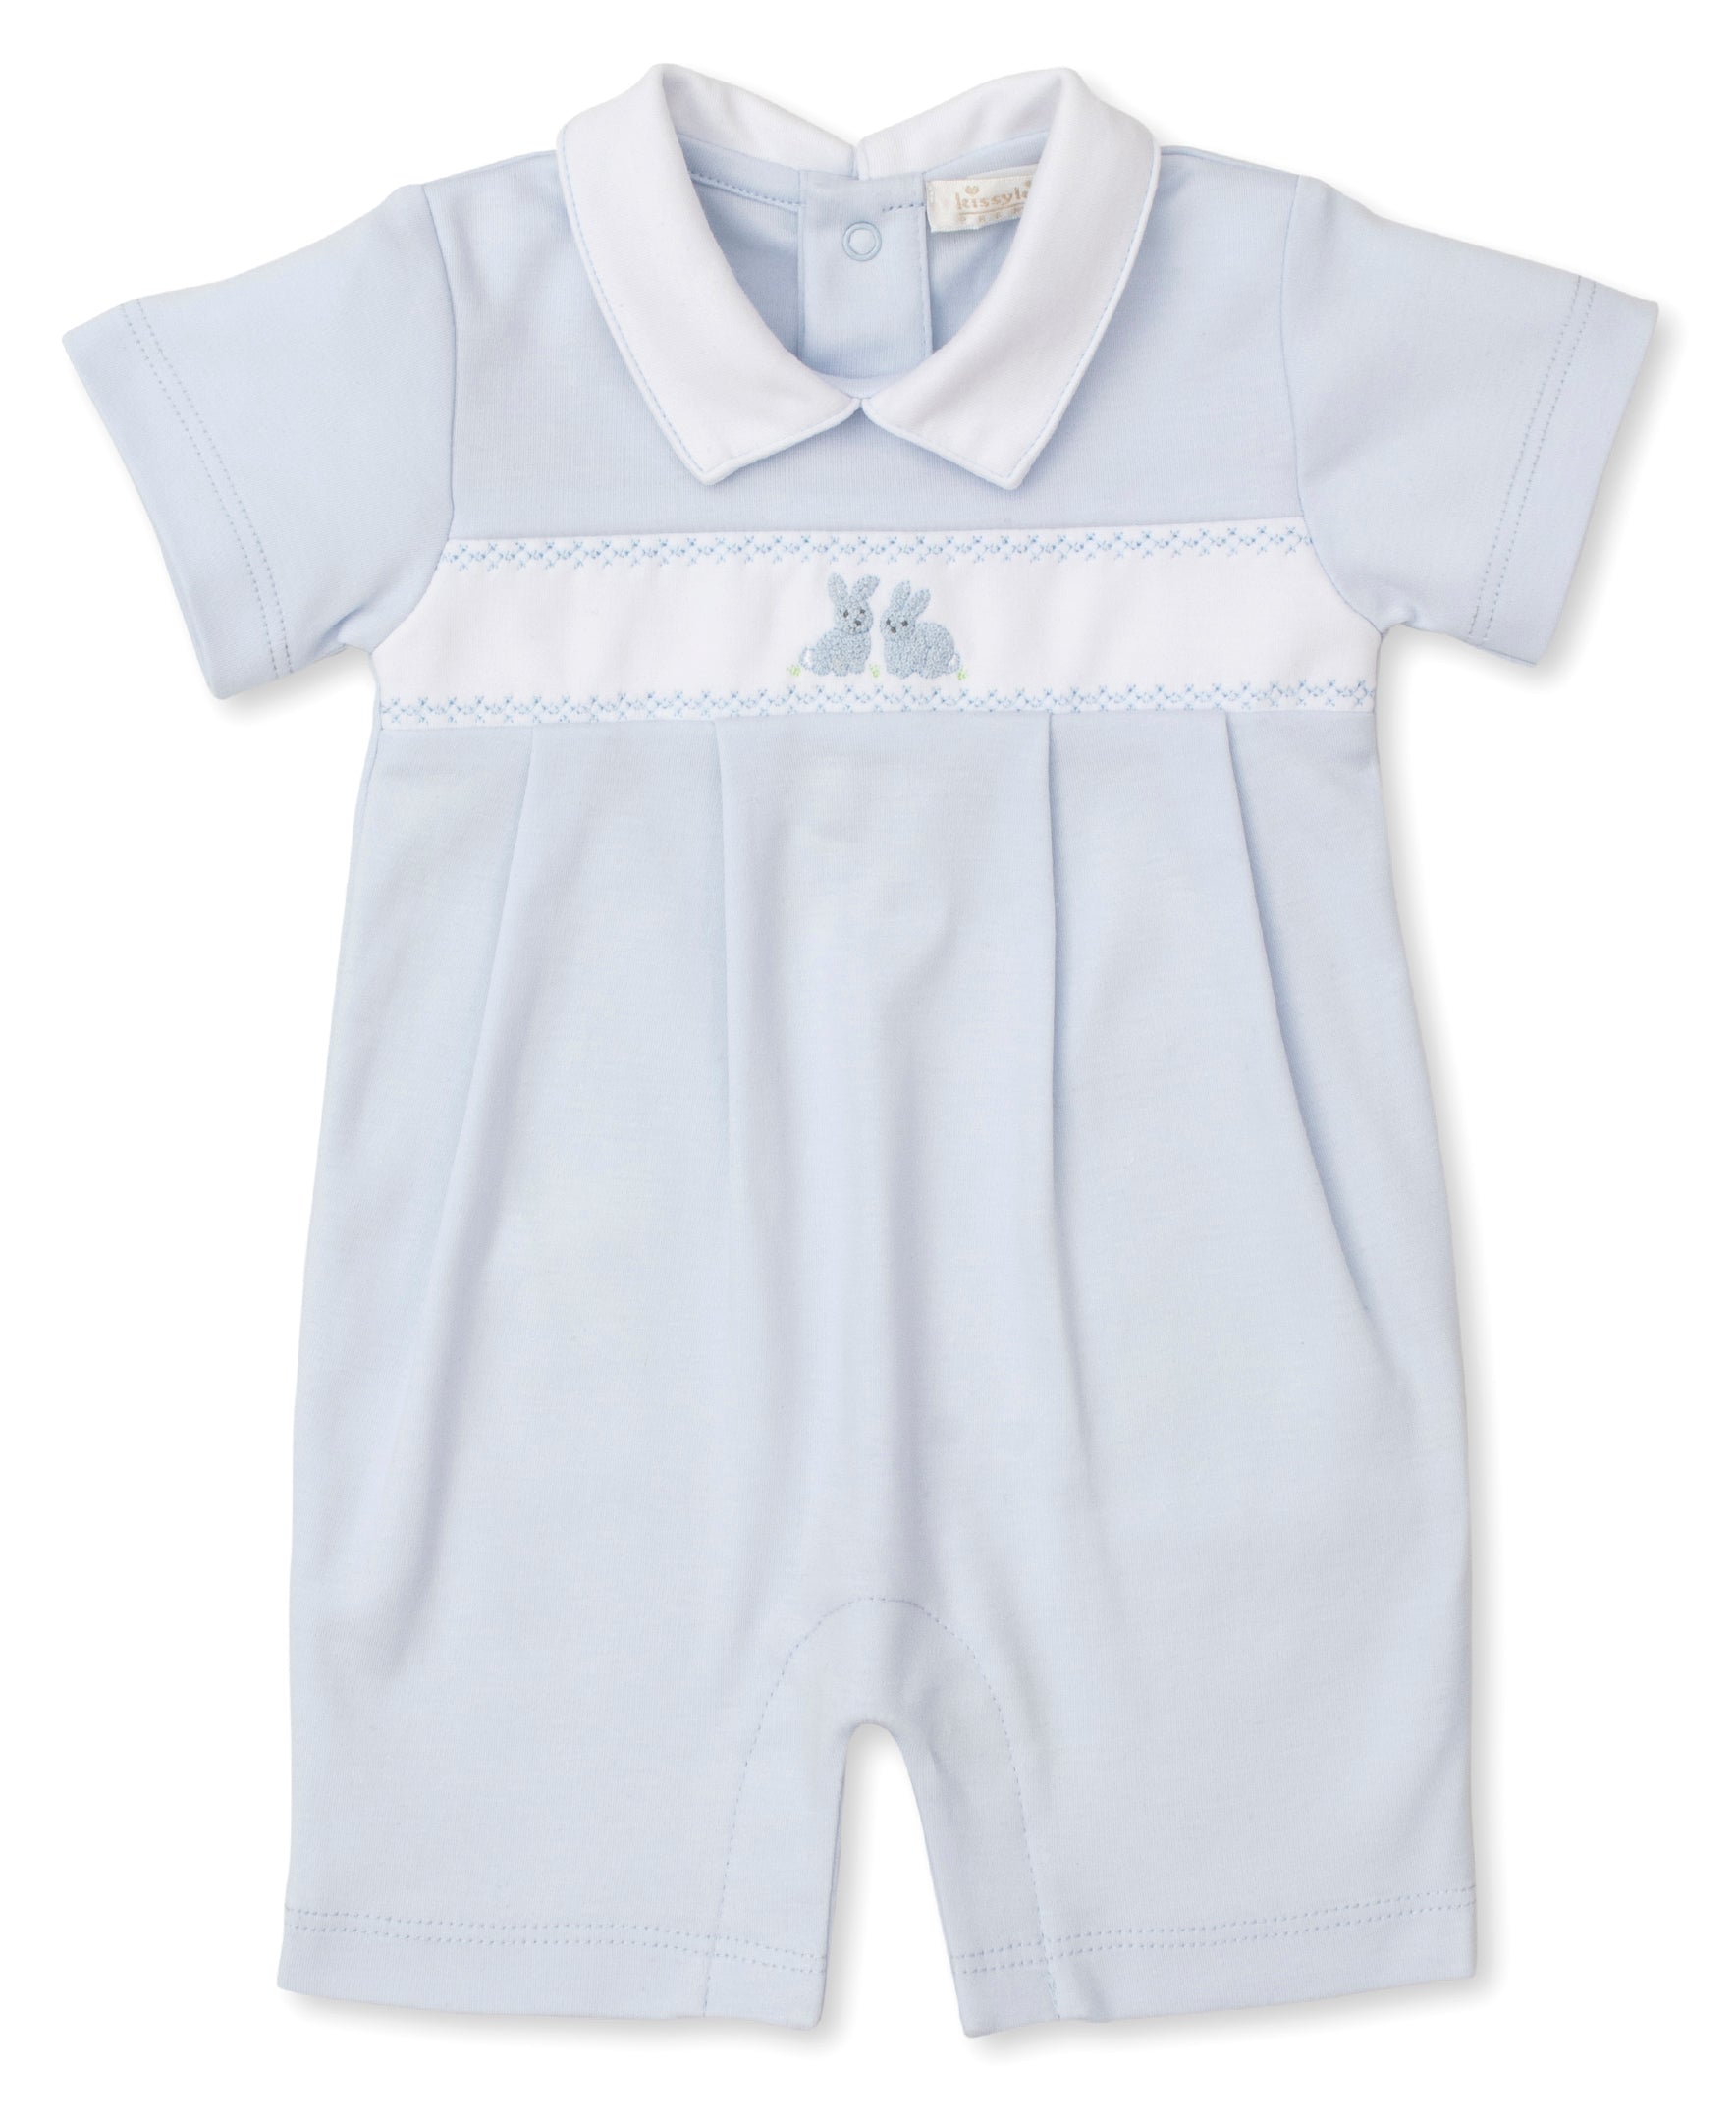 Light blue Premier Cottontail Hollows: Short Playsuit w/ Hand Embroidered Bunnies